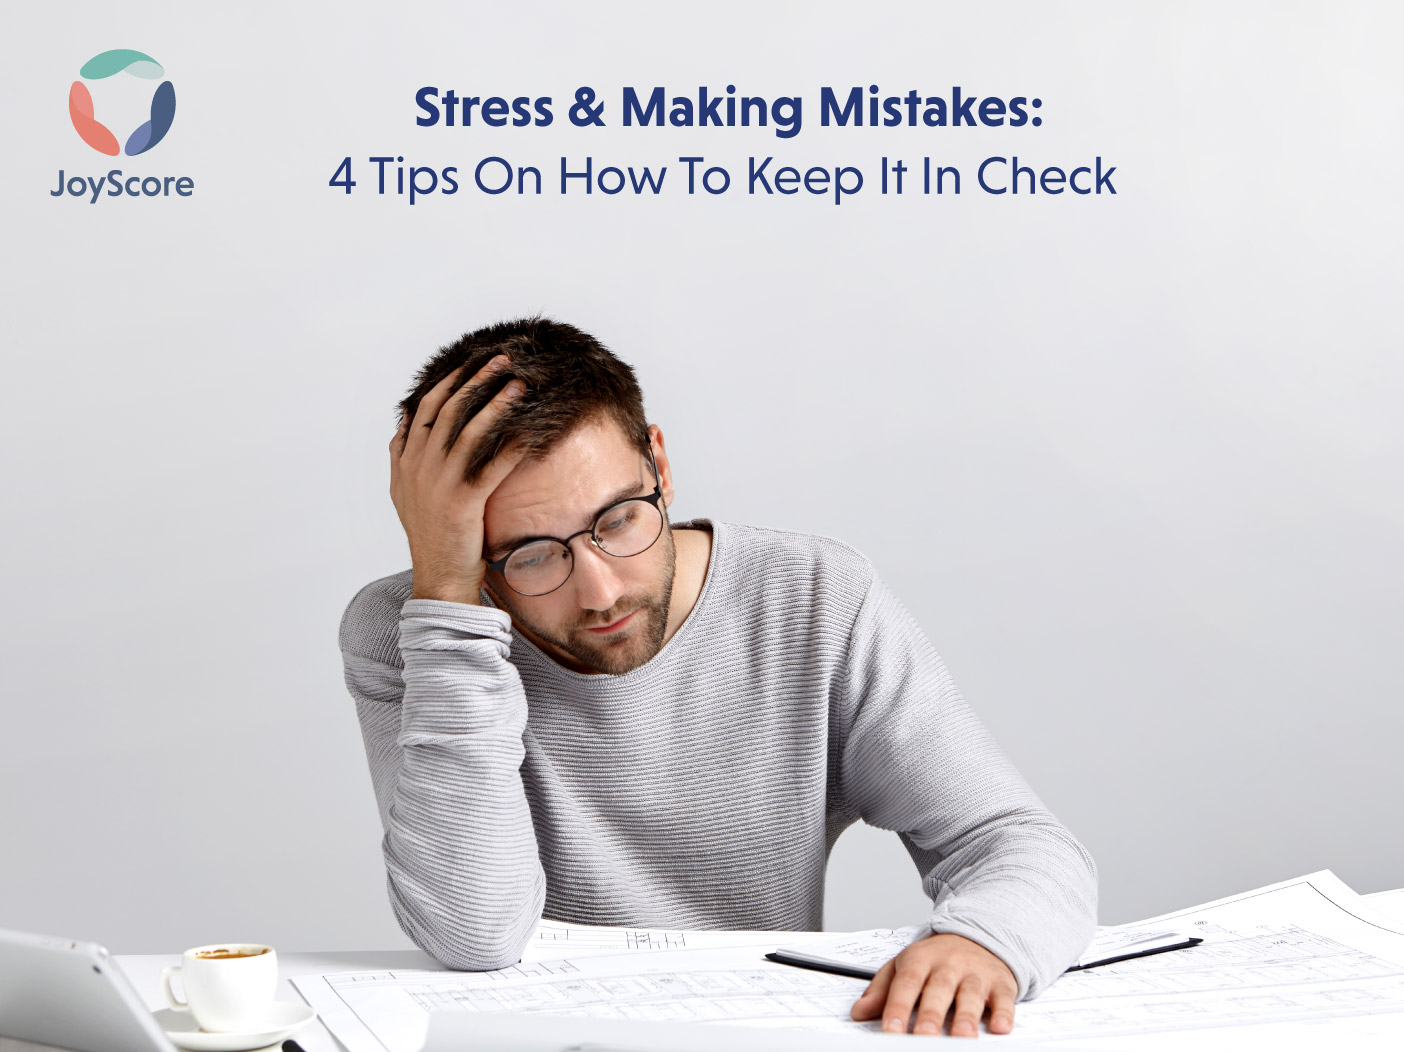 Stress and Making Mistakes: 4 Tips on How to Keep it in Check